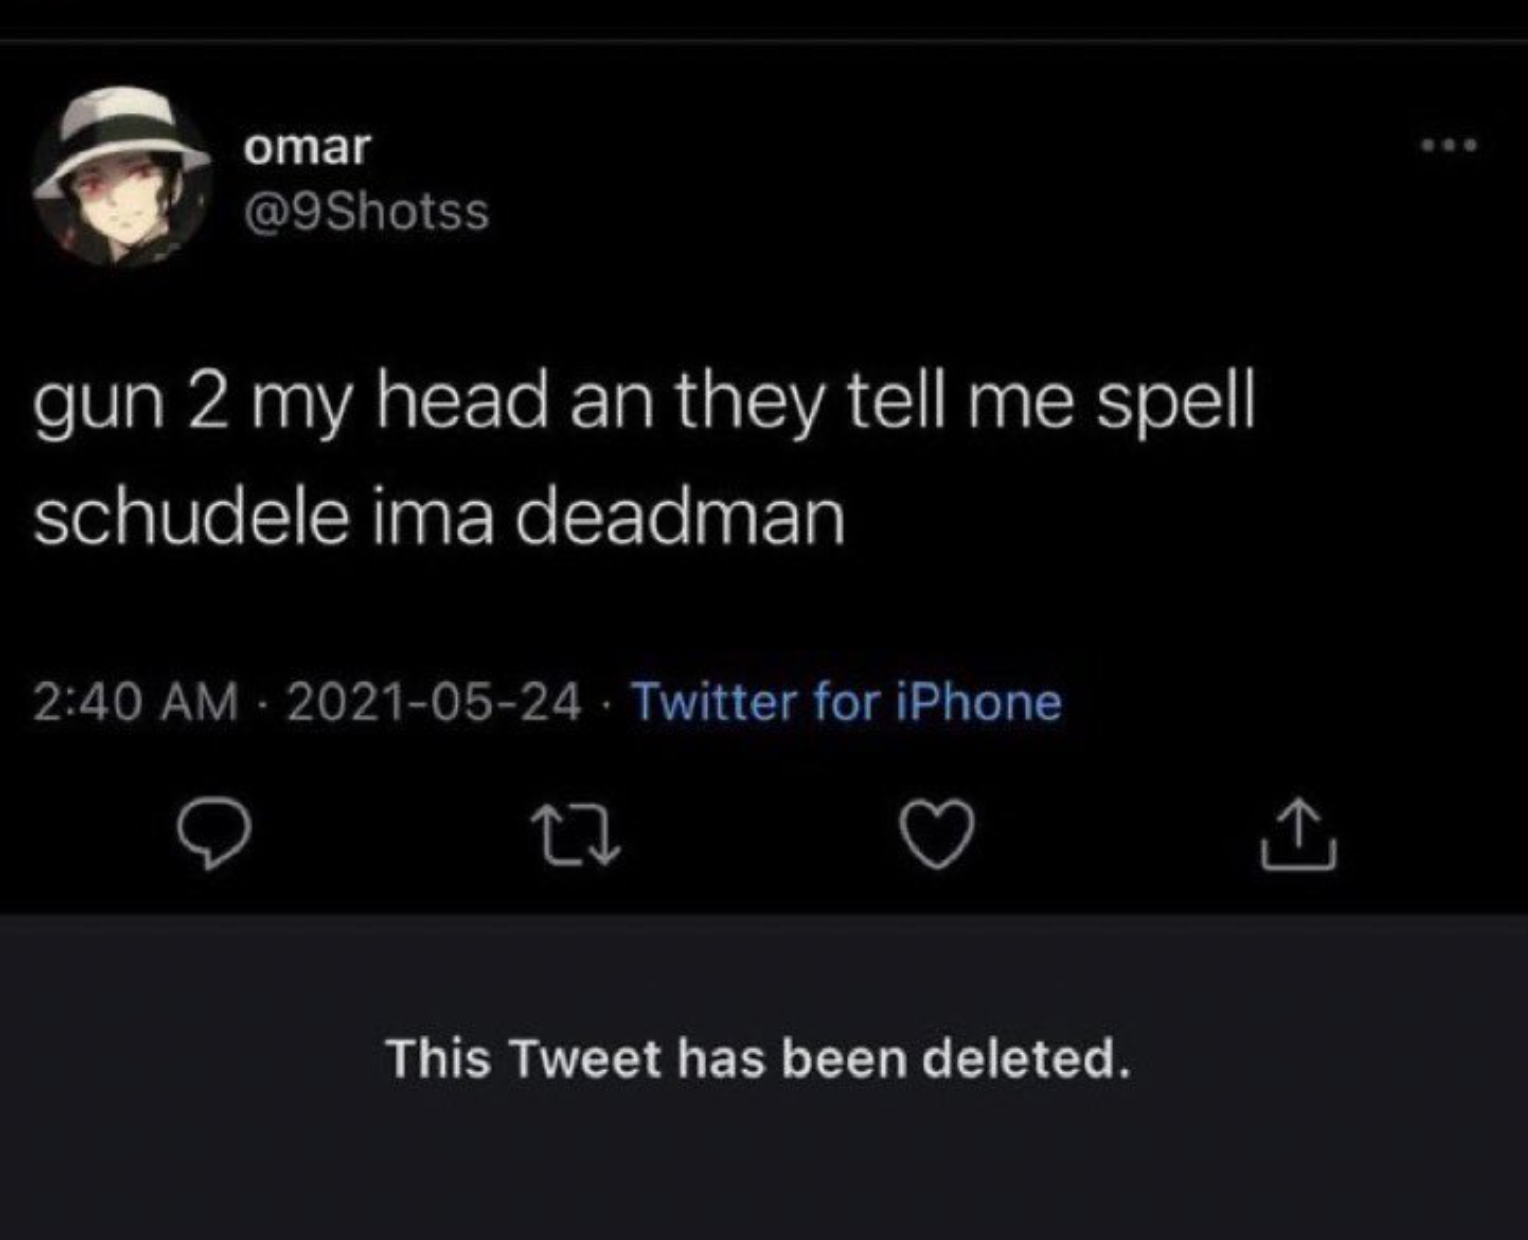 screenshot - omar gun 2 my head an they tell me spell schudele ima deadman Twitter for iPhone 27 This Tweet has been deleted.